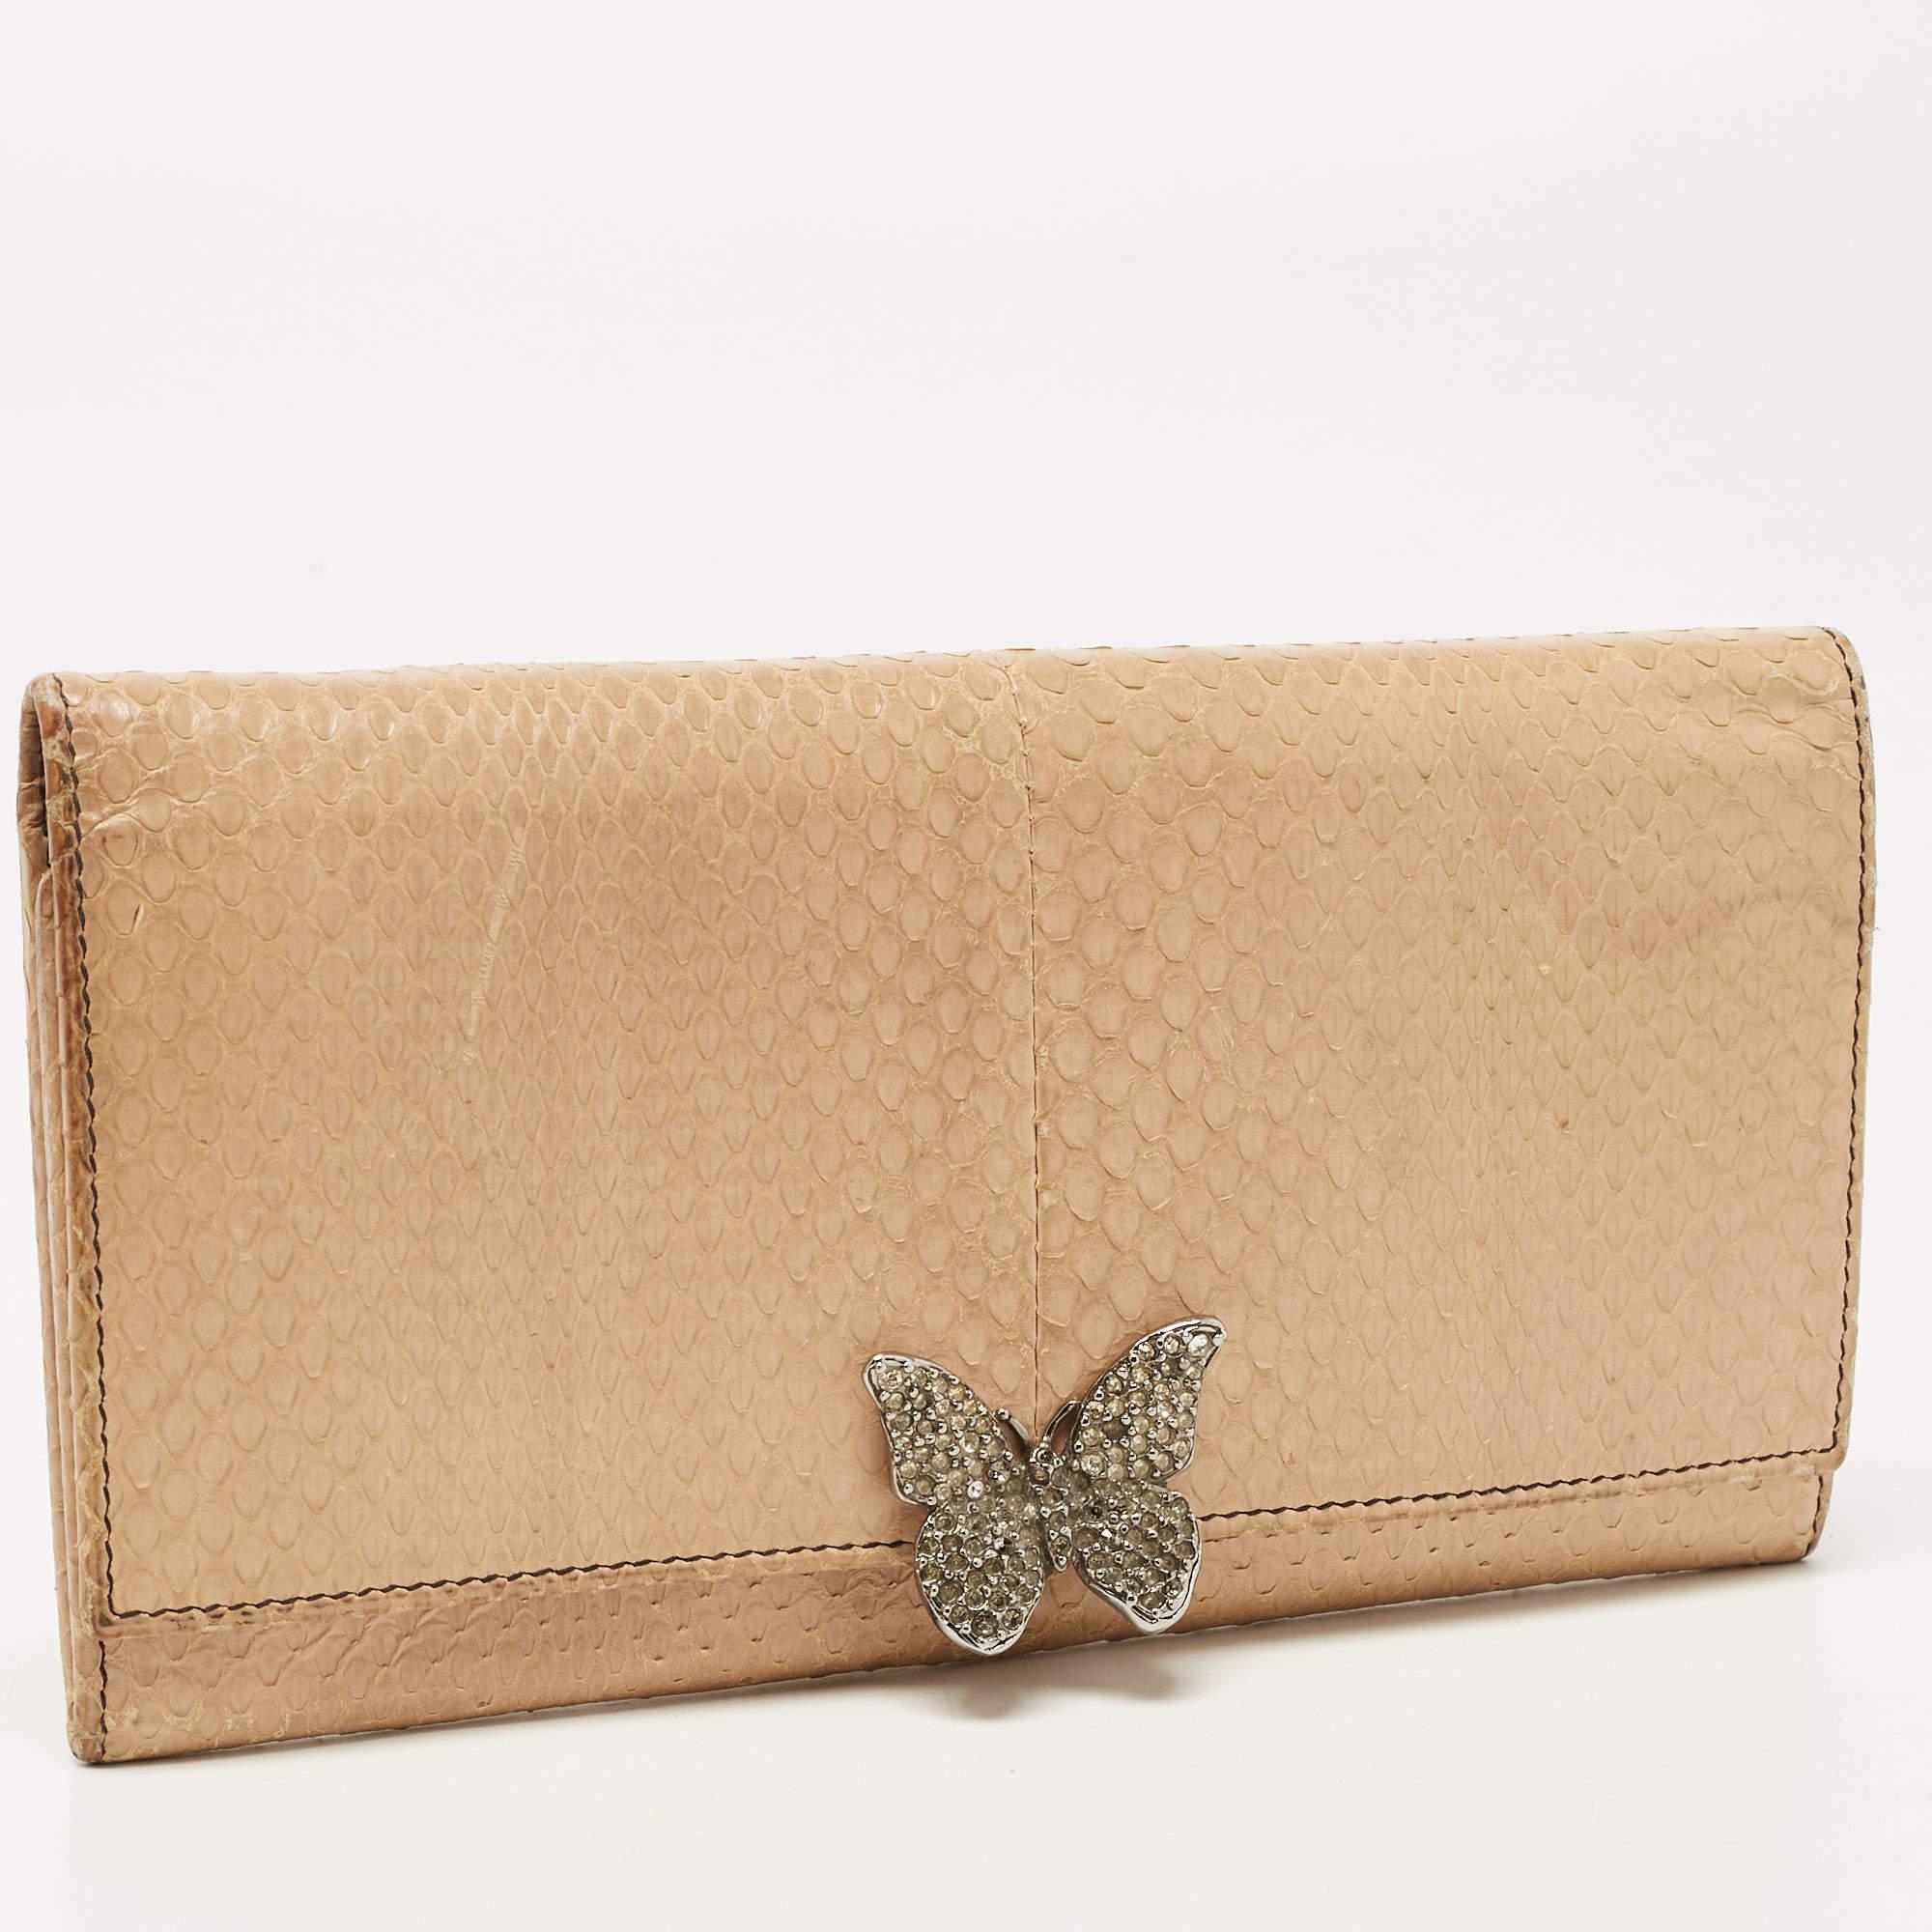 Convenient and stylish, this Valentino wallet showcases a classy design. Created from Watersnake leather, it is designed with a butterfly embellishment on the front and its lined interior is divided into different compartments.

